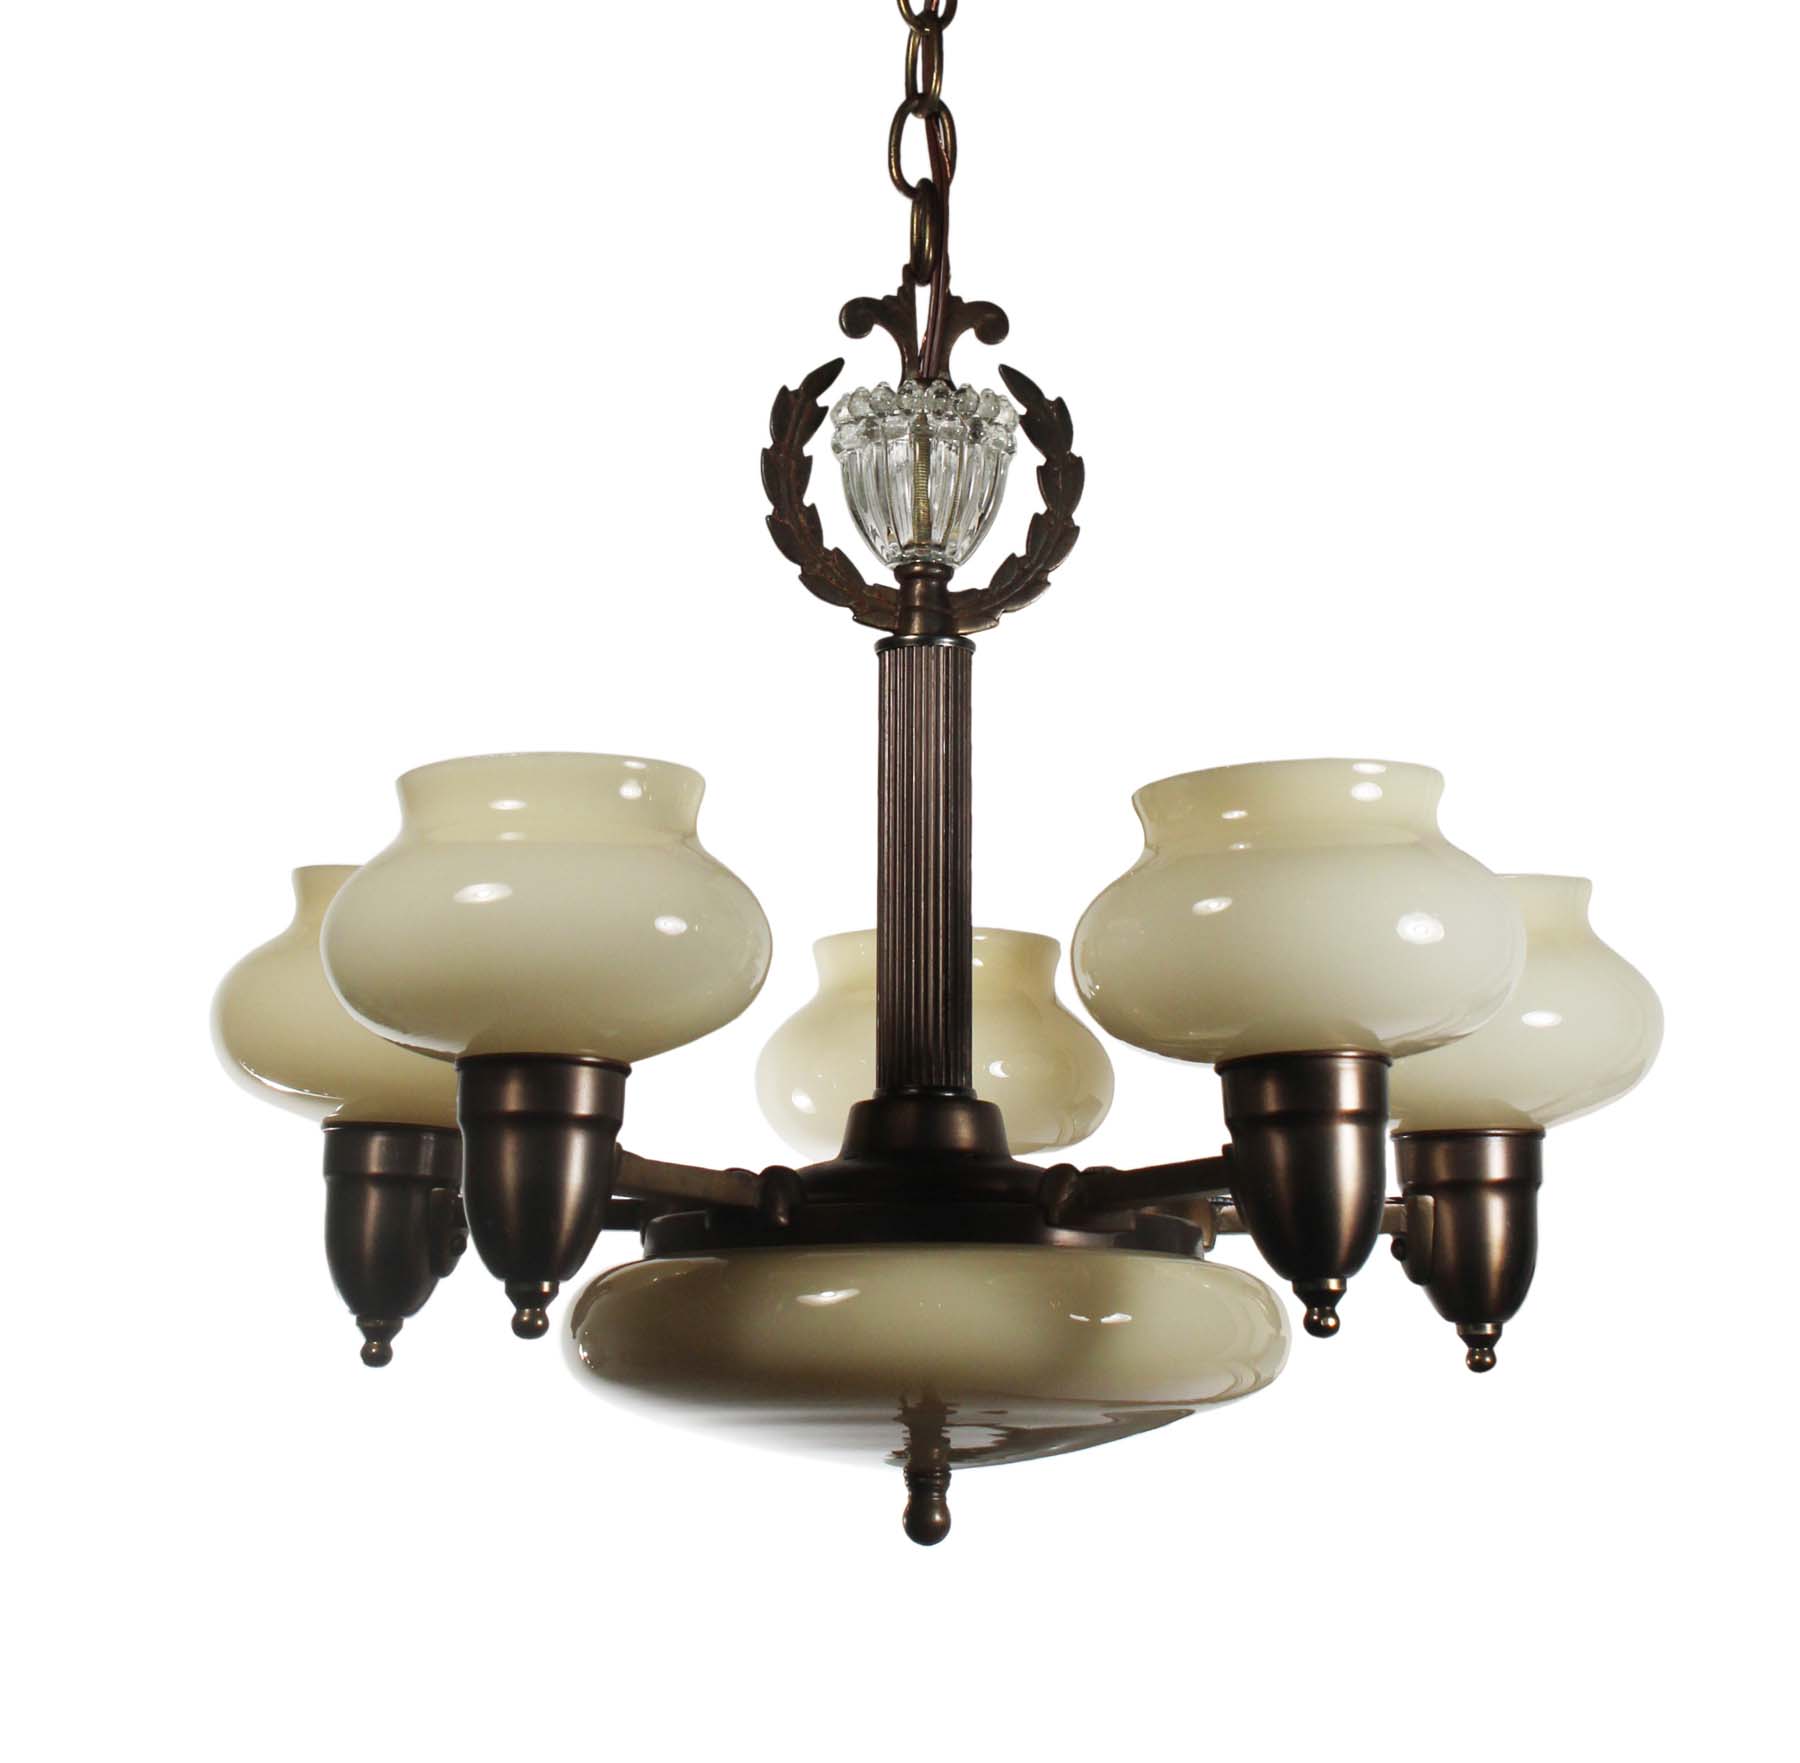 SOLD Chandelier with Original Sit-In Shades, Antique Lighting-0